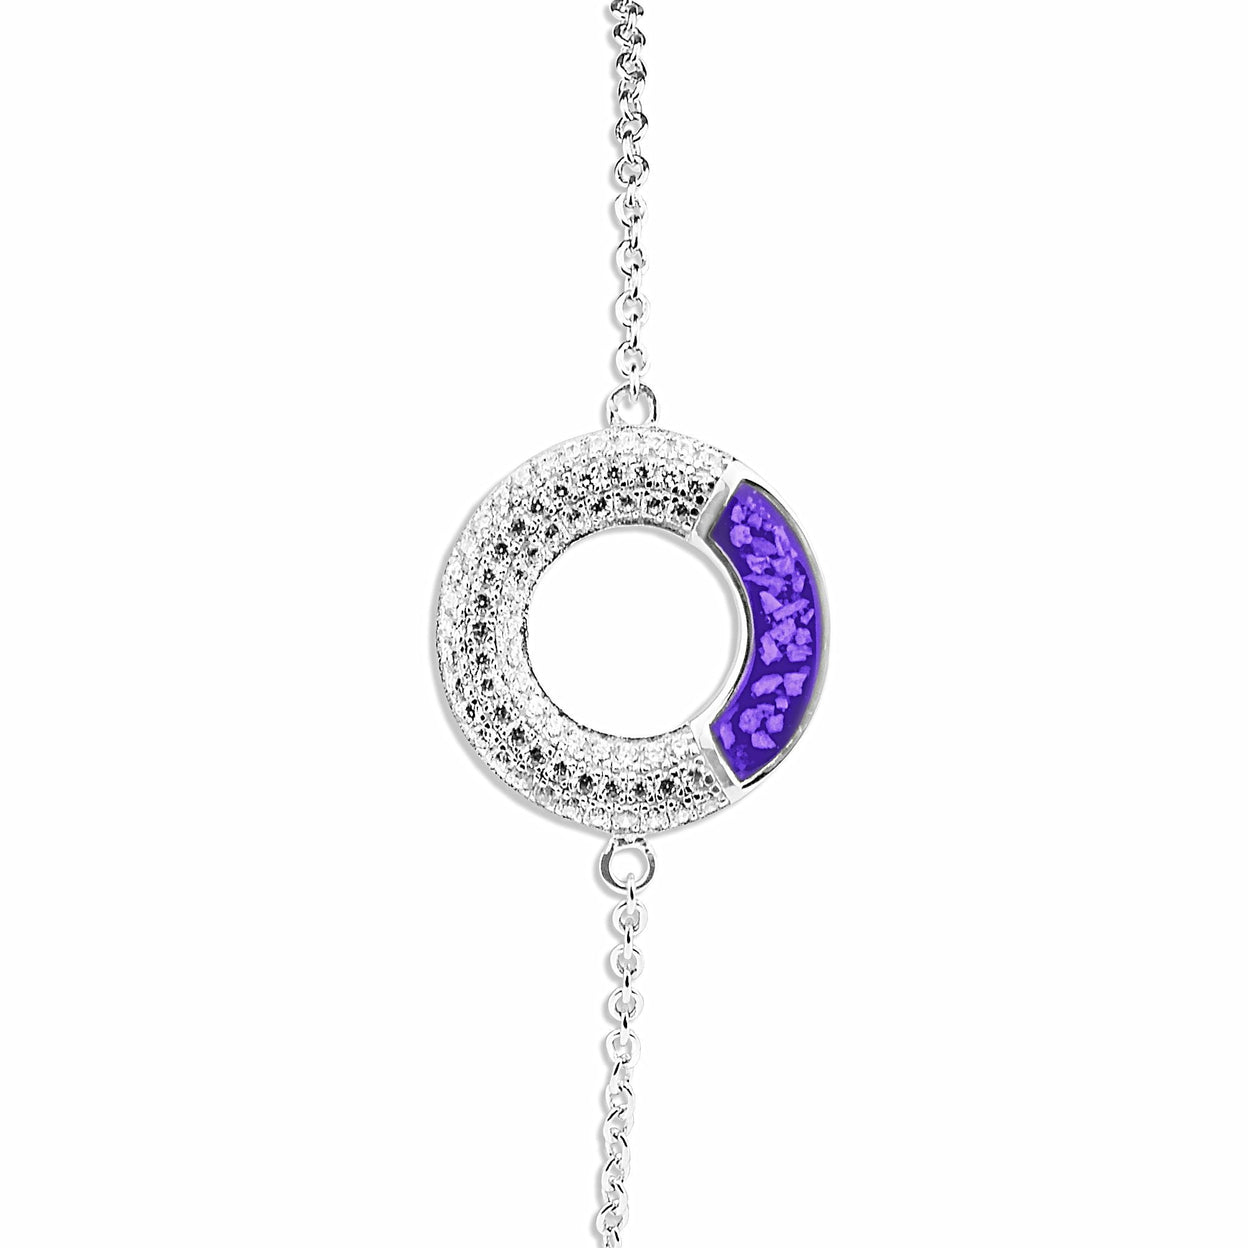 Load image into Gallery viewer, EverWith Ladies Eternal Memorial Ashes Bracelet with Fine Crystals